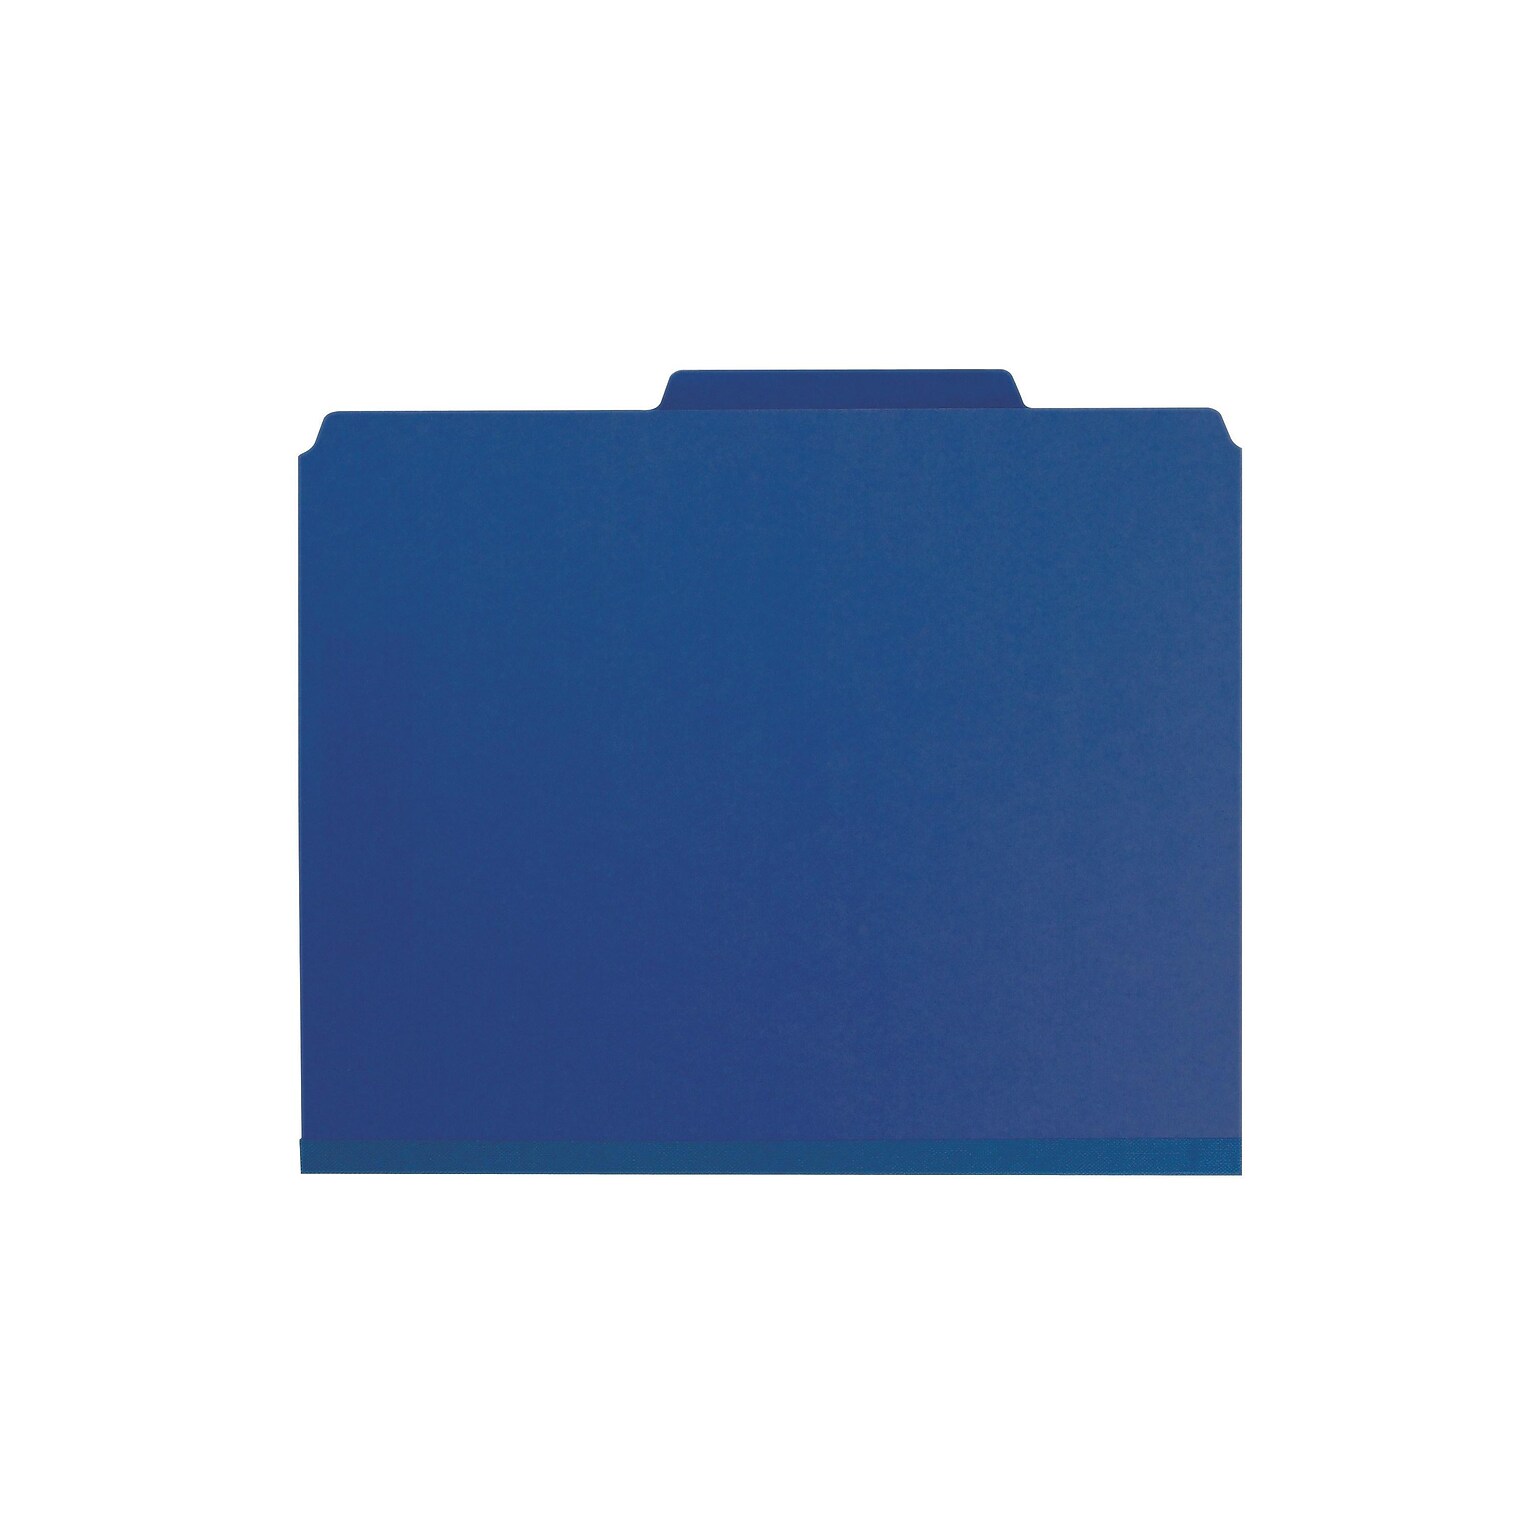 Smead Classification Folders with SafeSHIELD Fasteners, 3 Expansion, Letter Size, 3 Dividers, Dark Blue, 10/Box (14096)